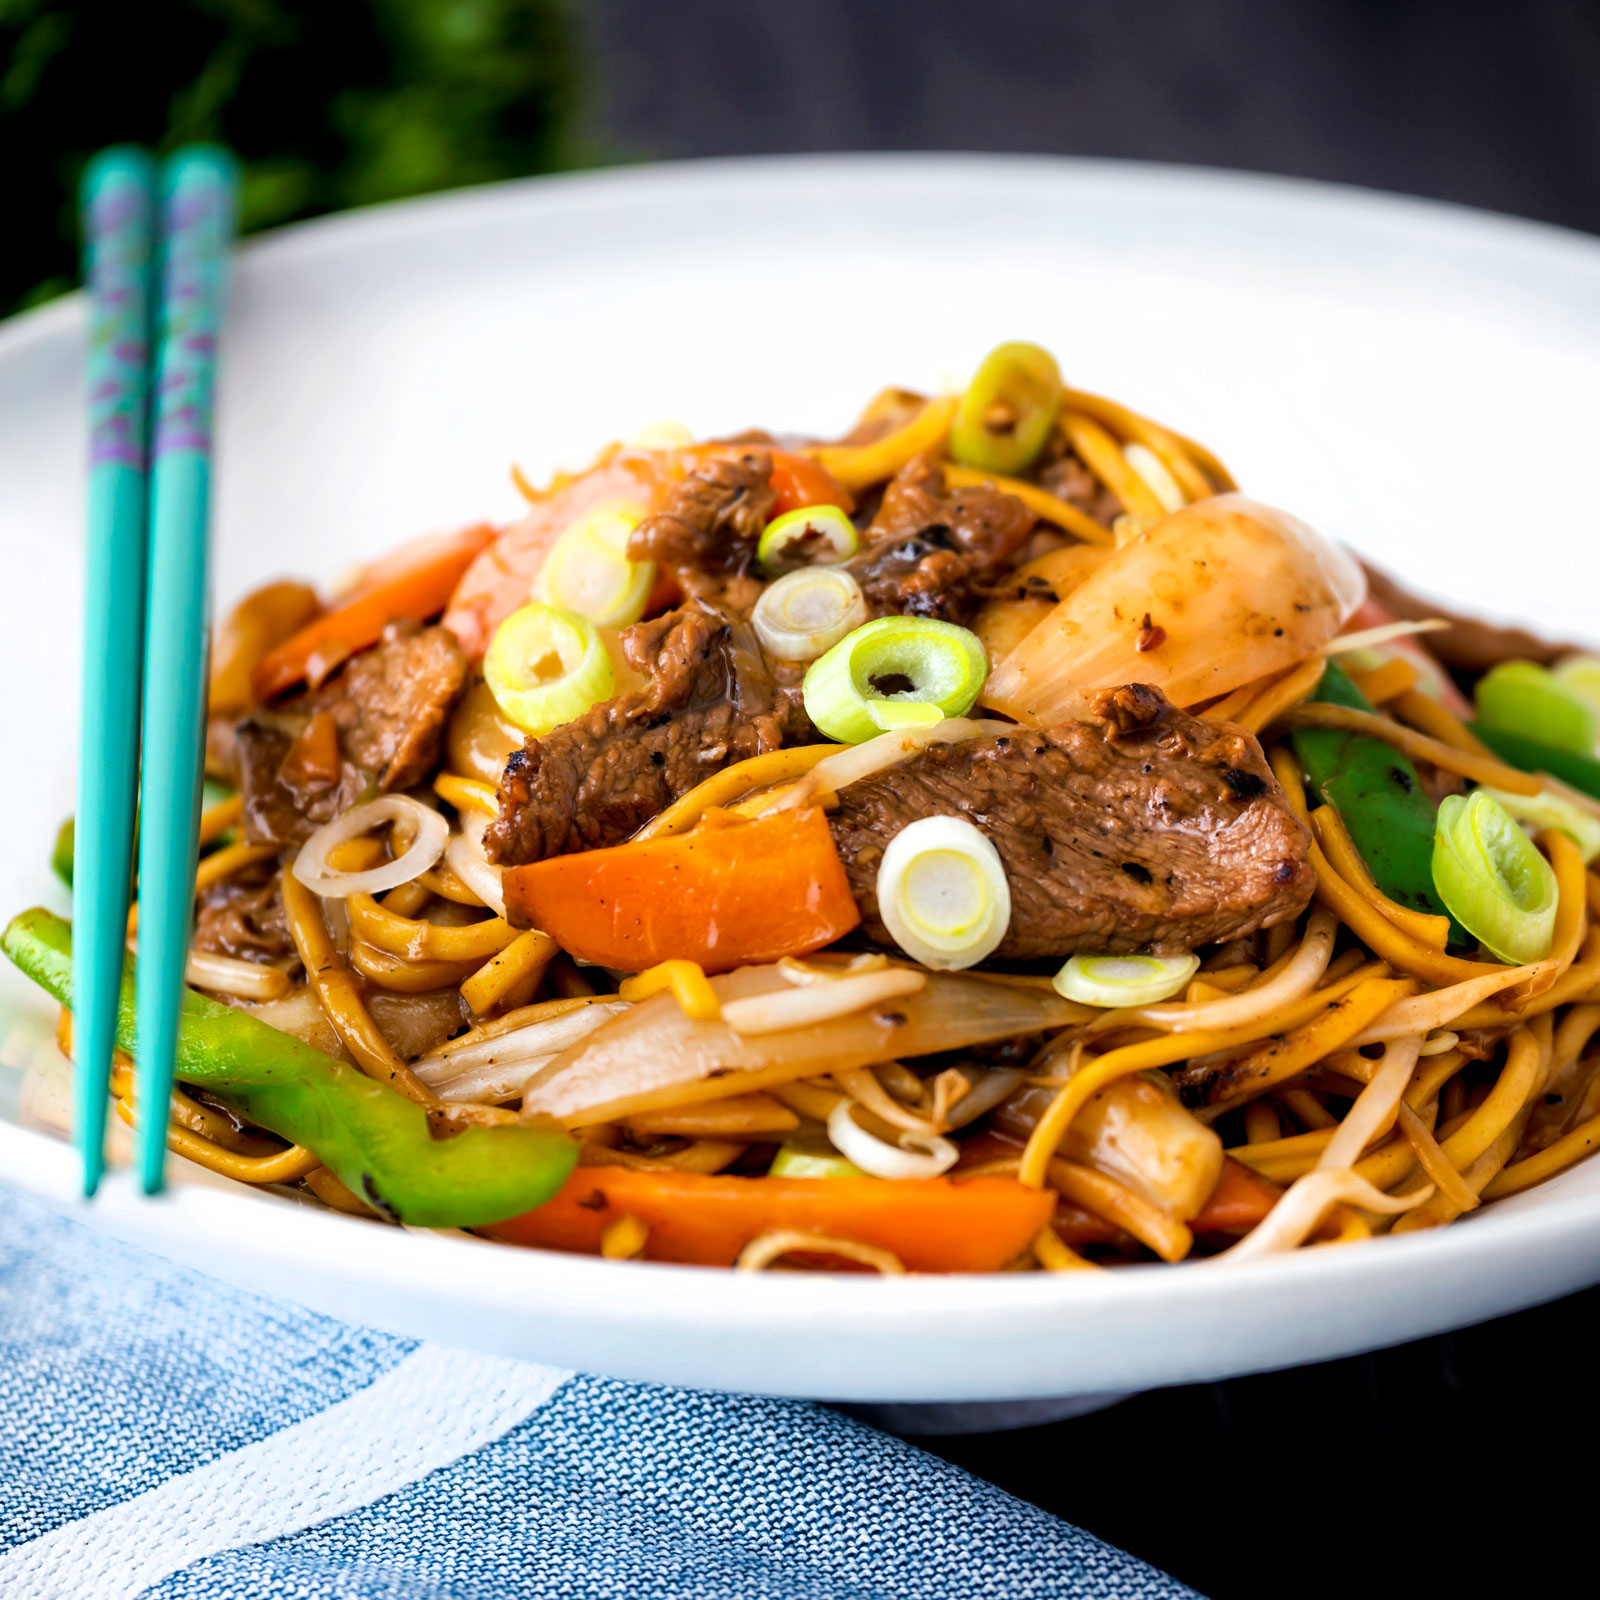 Homemade Chinese fakeaway recipe for beef chow mein noodles.